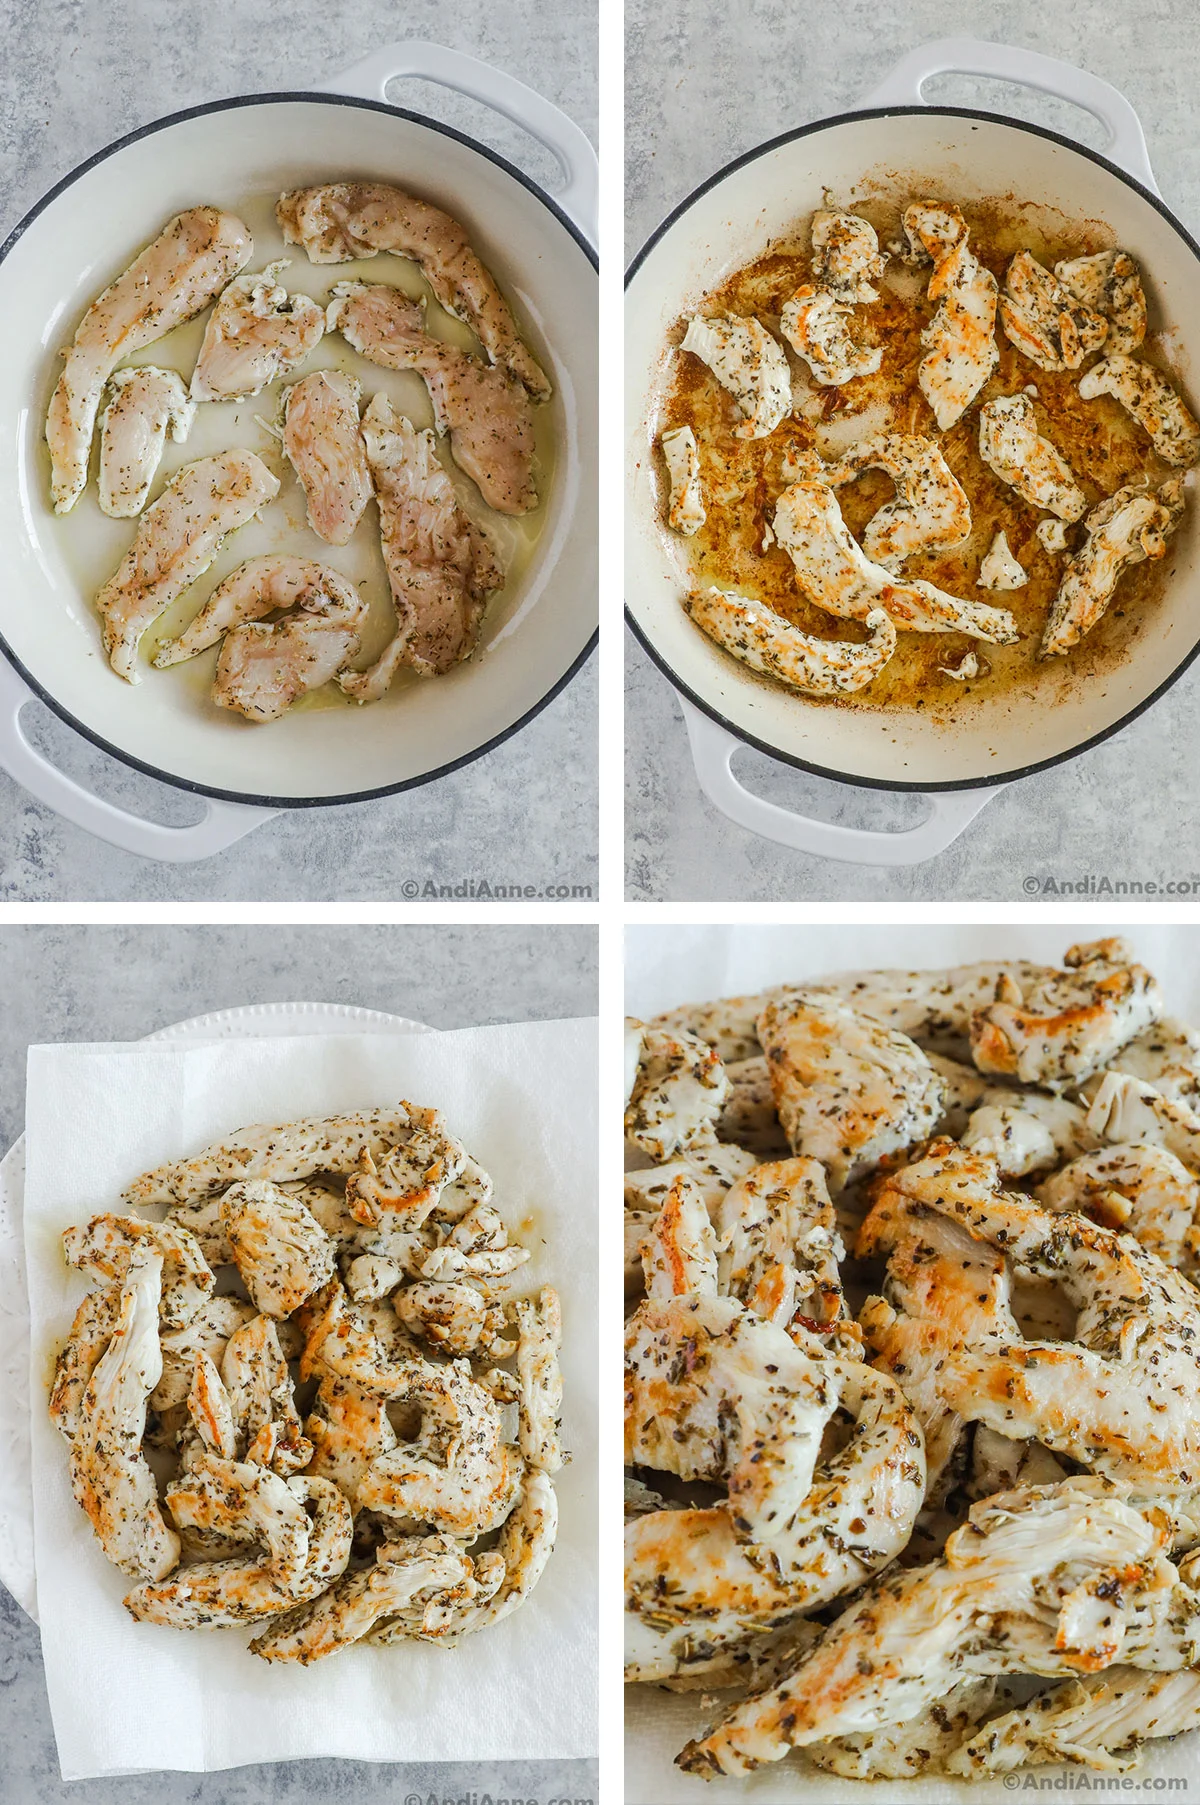 Four images. First two are a pan with sliced raw chicken then cooked. Third and fourth are cooked sliced chicken on paper towel.